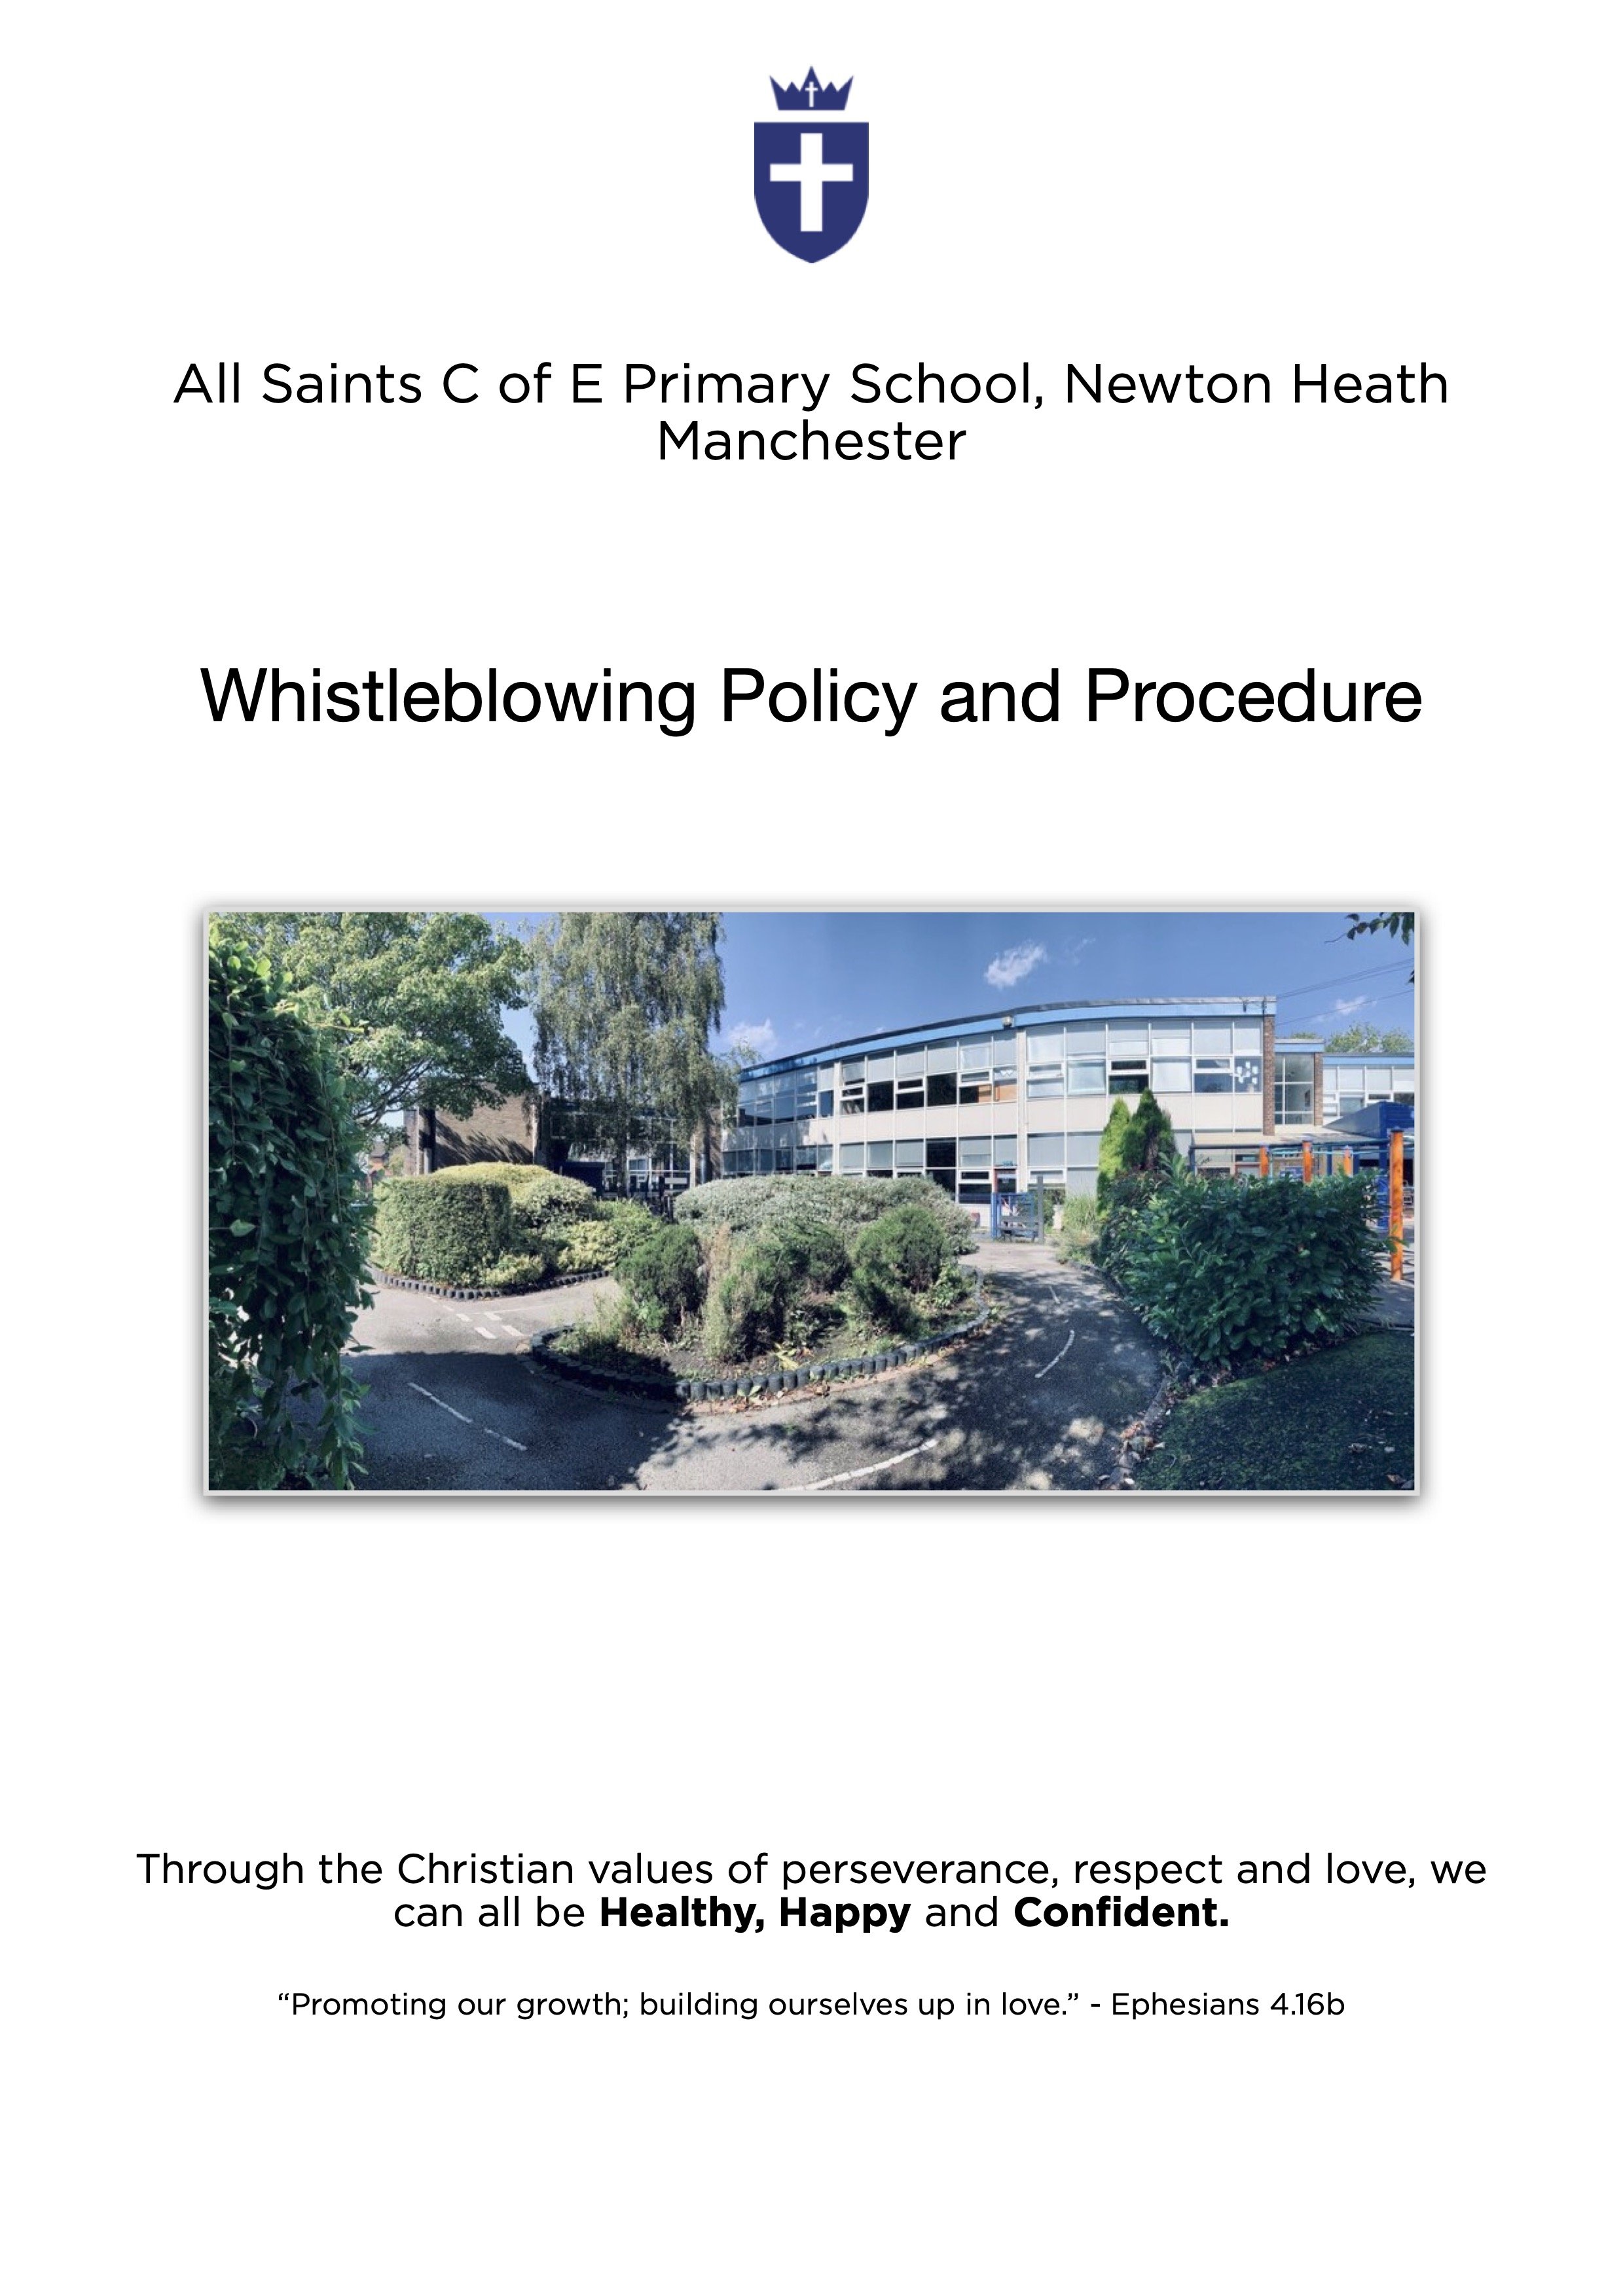 Whistleblowing Policy and Procedure.jpg